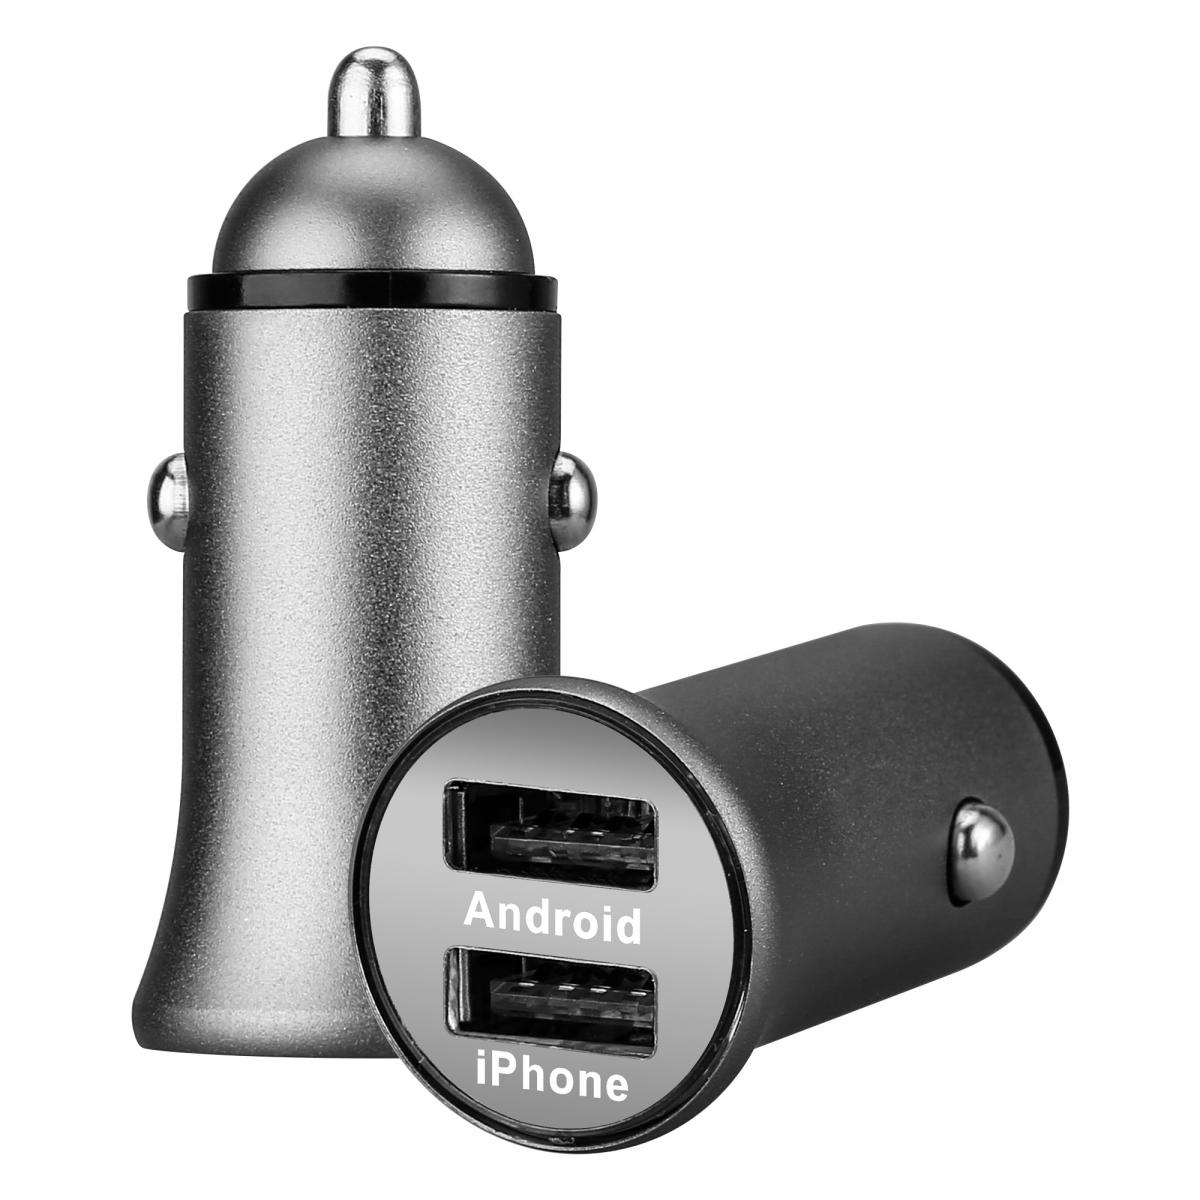 Shot - Double Adaptateur Metal Allume Cigare USB pour Smartphone SAMSUNG Galaxy XCover Pro Prise Double 2 Ports Voiture Chargeur Univer - Chargeur Voiture 12V